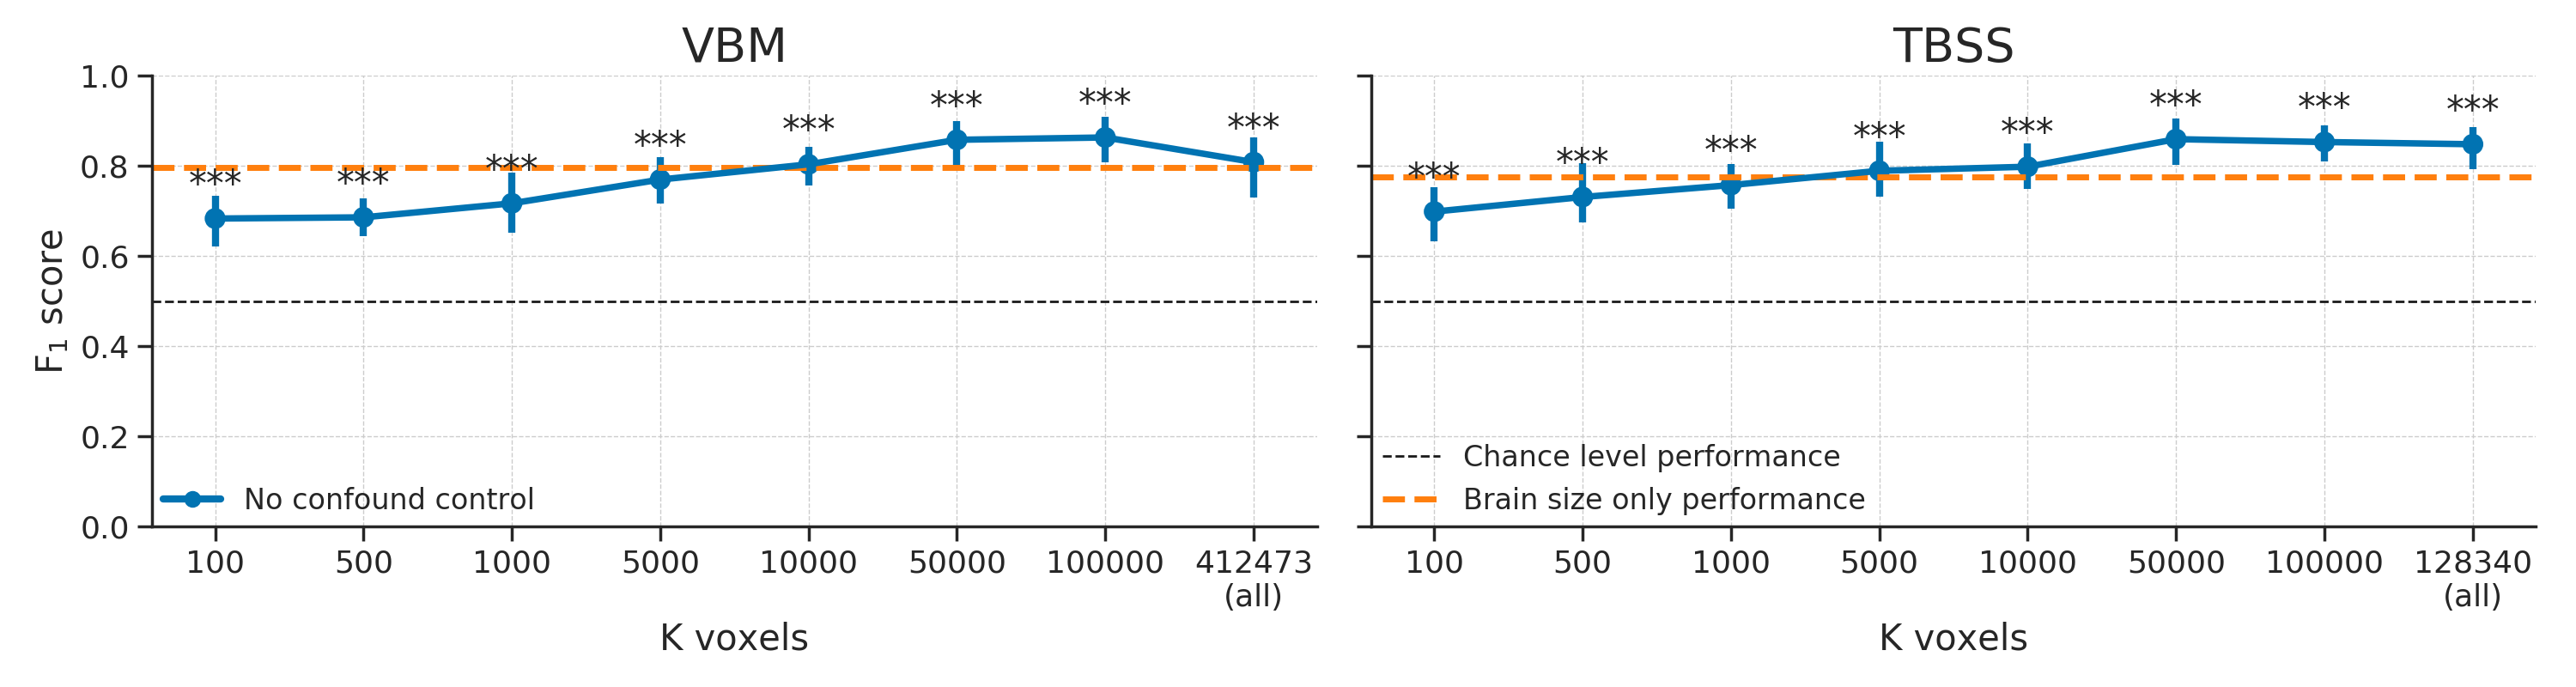 Baseline scores using the VBM (left) and TBSS (right) data without any confound control. Scores reflect the average \(F_{1}\) score across 10 folds; error bars reflect 95% confidence intervals. The dashed black line reflect theoretical chance-level performance and the dashed orange line reflects the average model performance when only brain size is used as a predictor for reference; Asterisks indicates significant performance above chance: *** = \(p < 0.001\), ** = \(p < 0.01\), * = \(p < 0.05\).